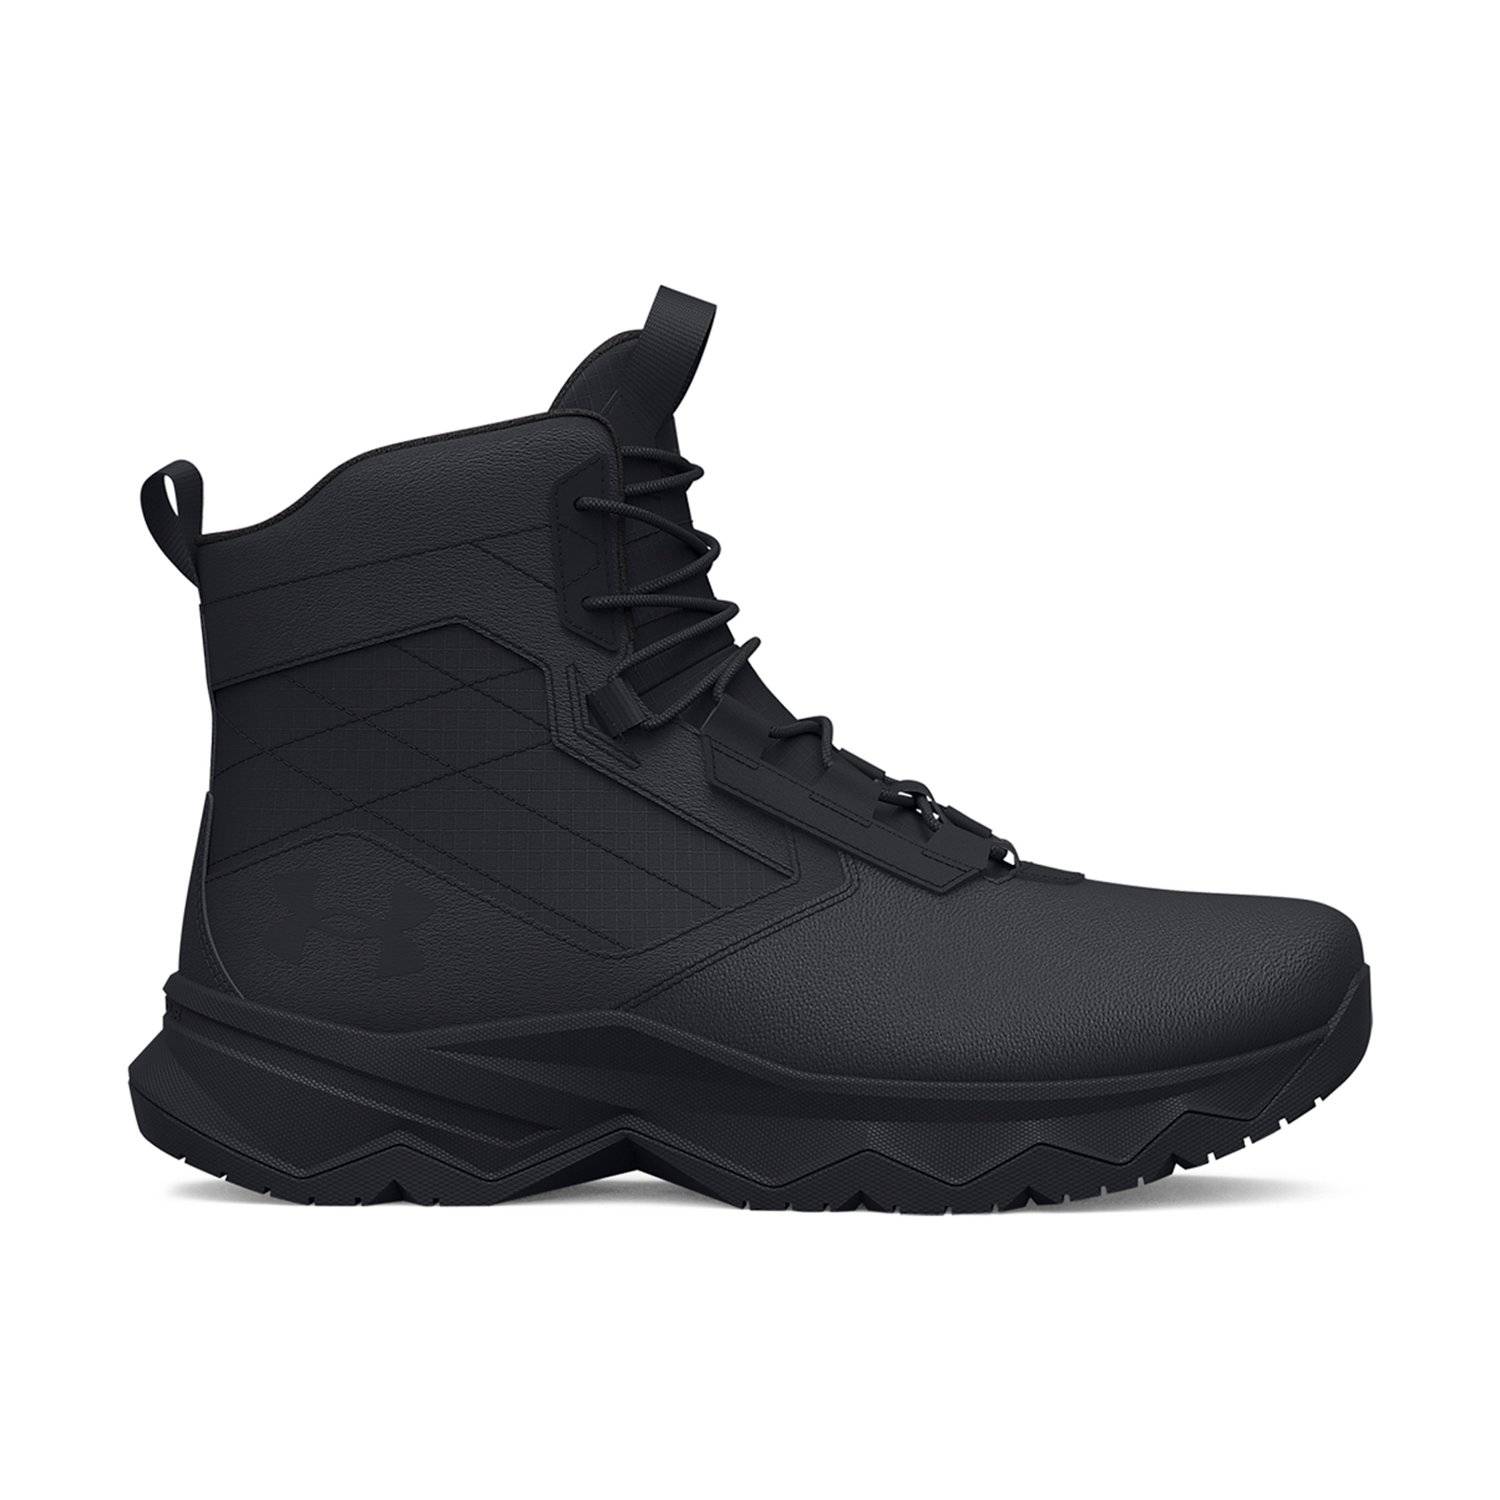 Under Armour Men's Micro G Strikefast Protect Tactical Shoes